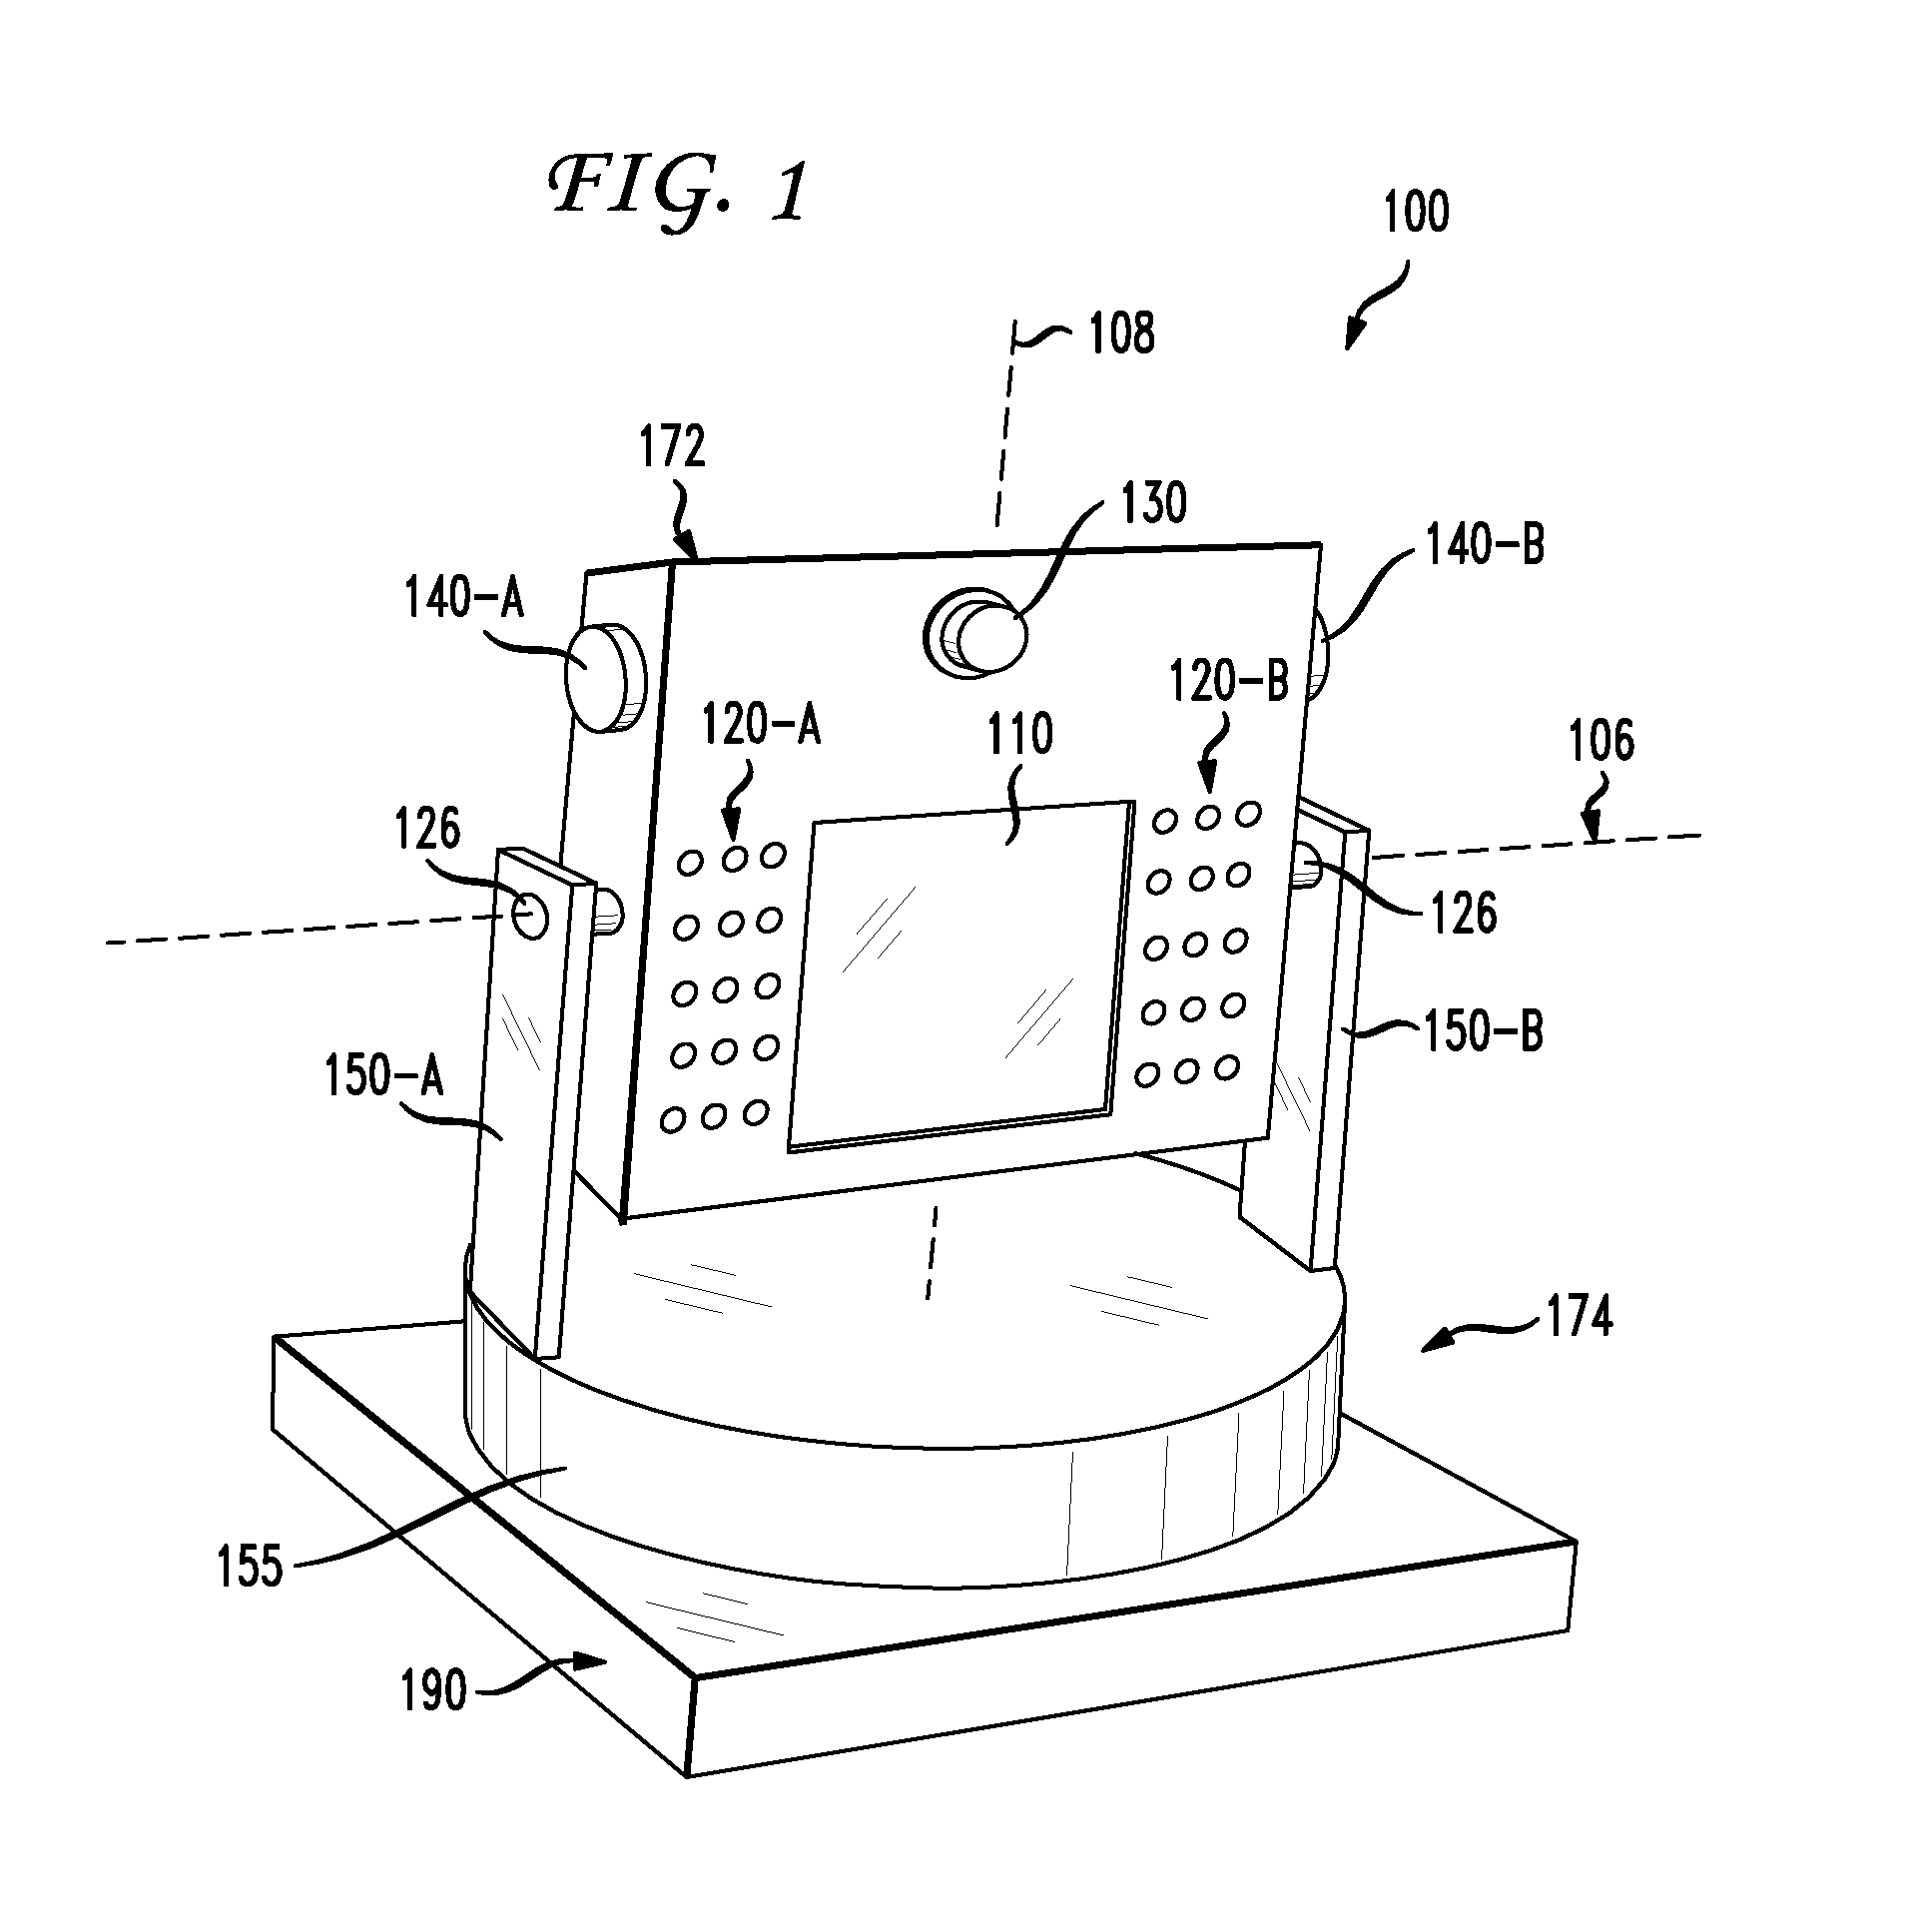 Method and system for controlling an imaging system